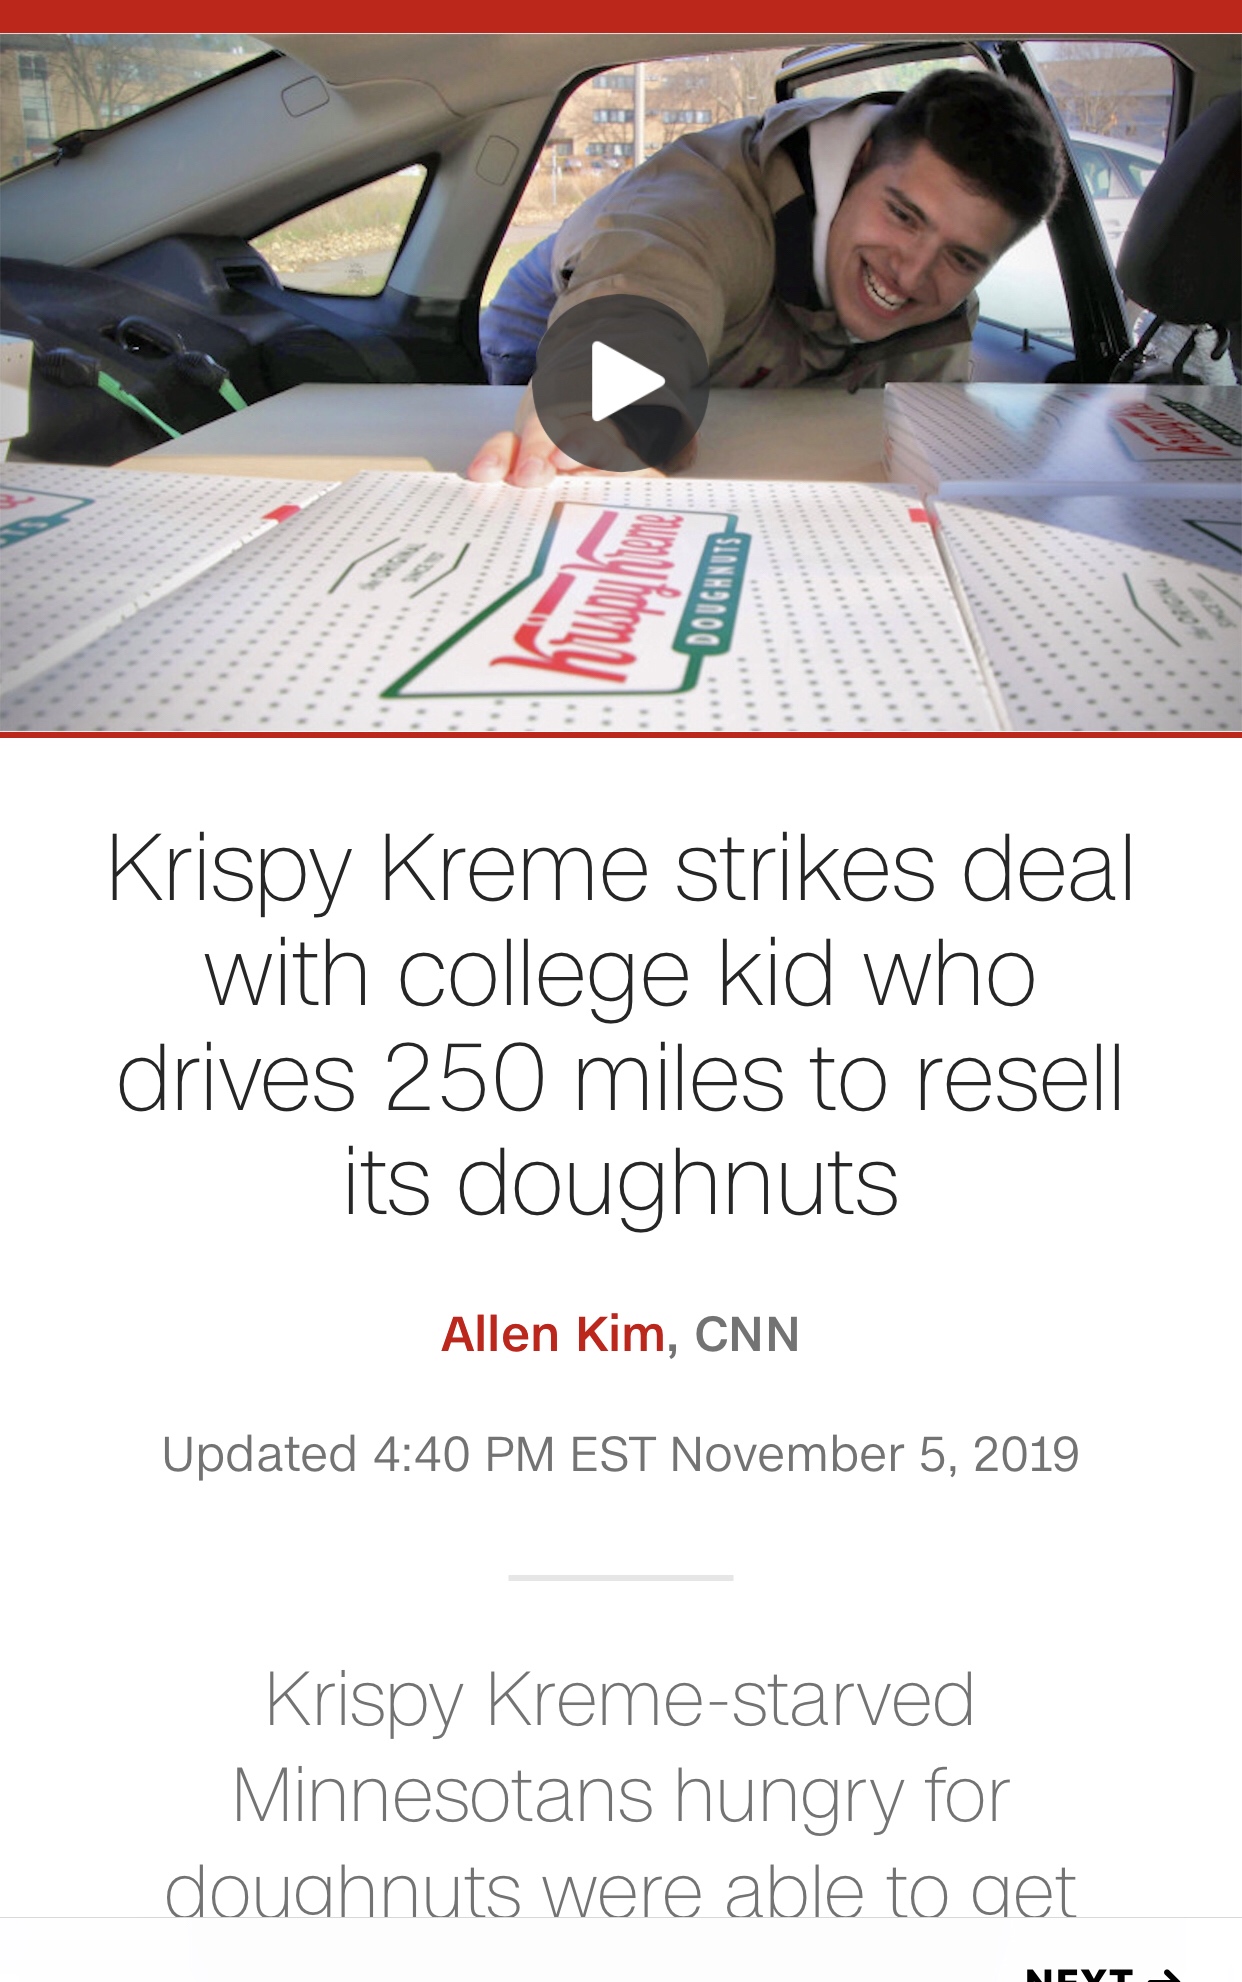 jayson gonzalez krispy kreme - Krispy Kreme strikes deal with college kid who drives 250 miles to resell its doughnuts Allen Kim, Cnn Updated Est Krispy Kremestarved Minnesotans hungry for doughnuts were able to get